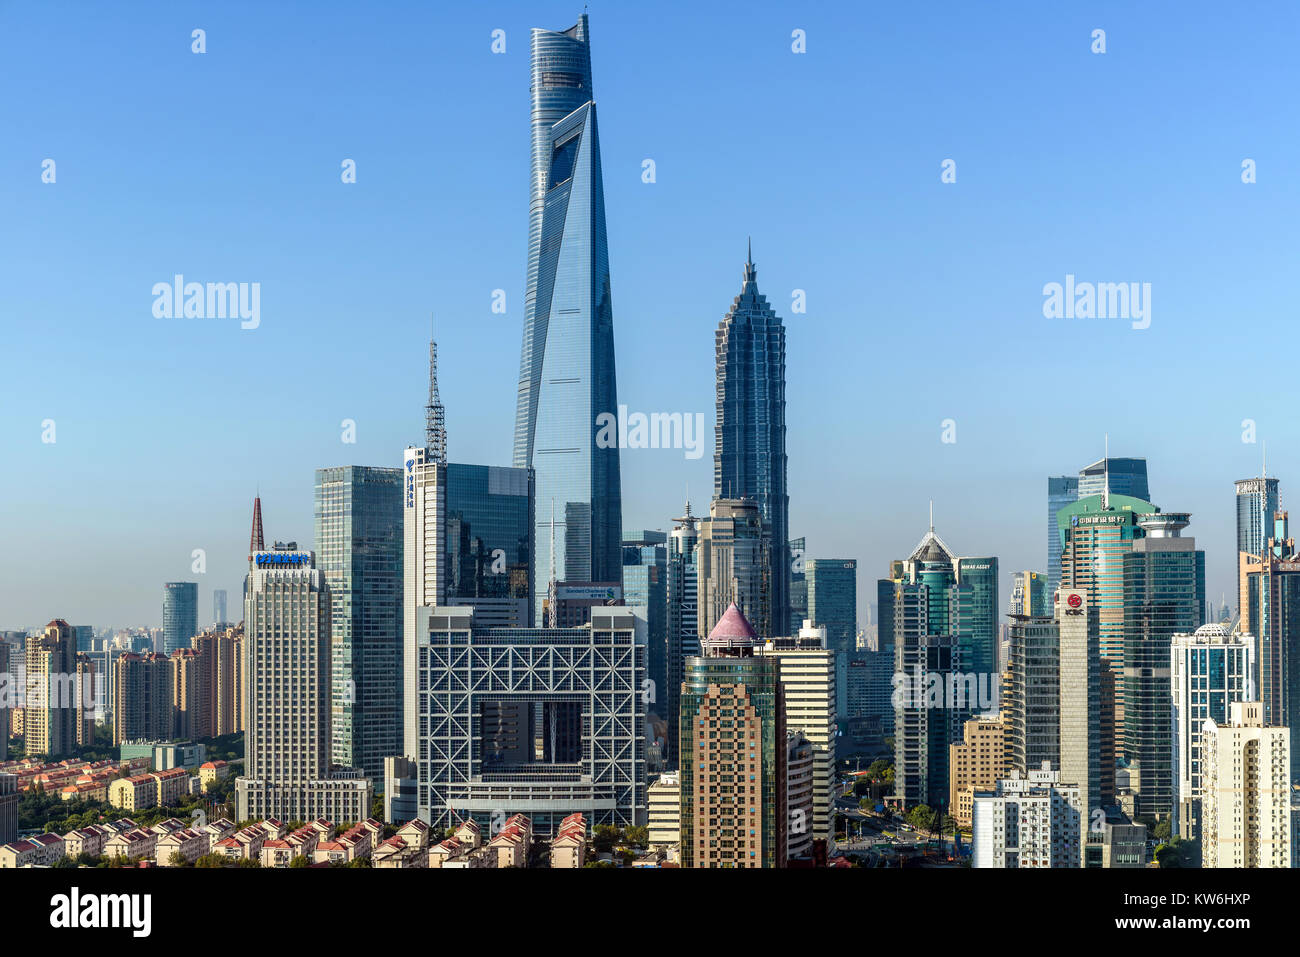 Shanghai Skyline - Panoramic morning view of the city's three tallest skyscrapers and their surrounding buildings at Lujiazui, Pudong, Shanghai, China Stock Photo